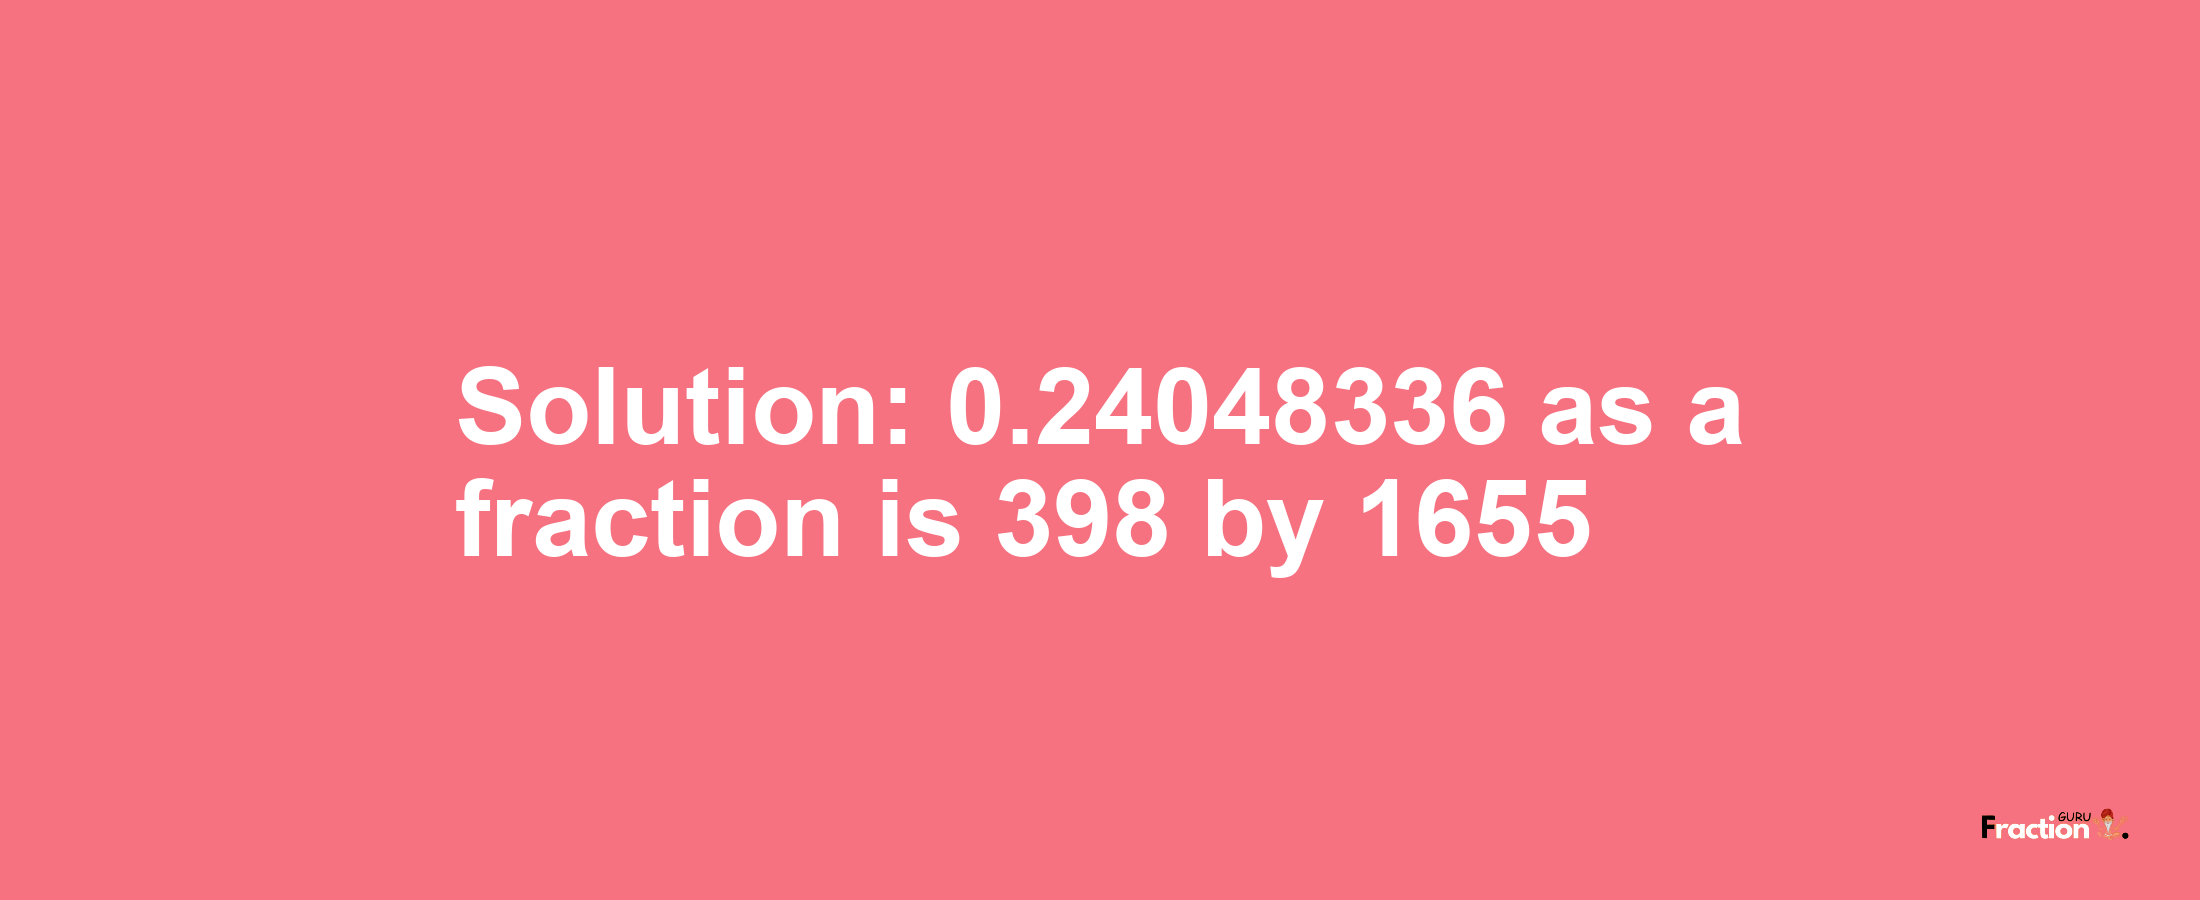 Solution:0.24048336 as a fraction is 398/1655